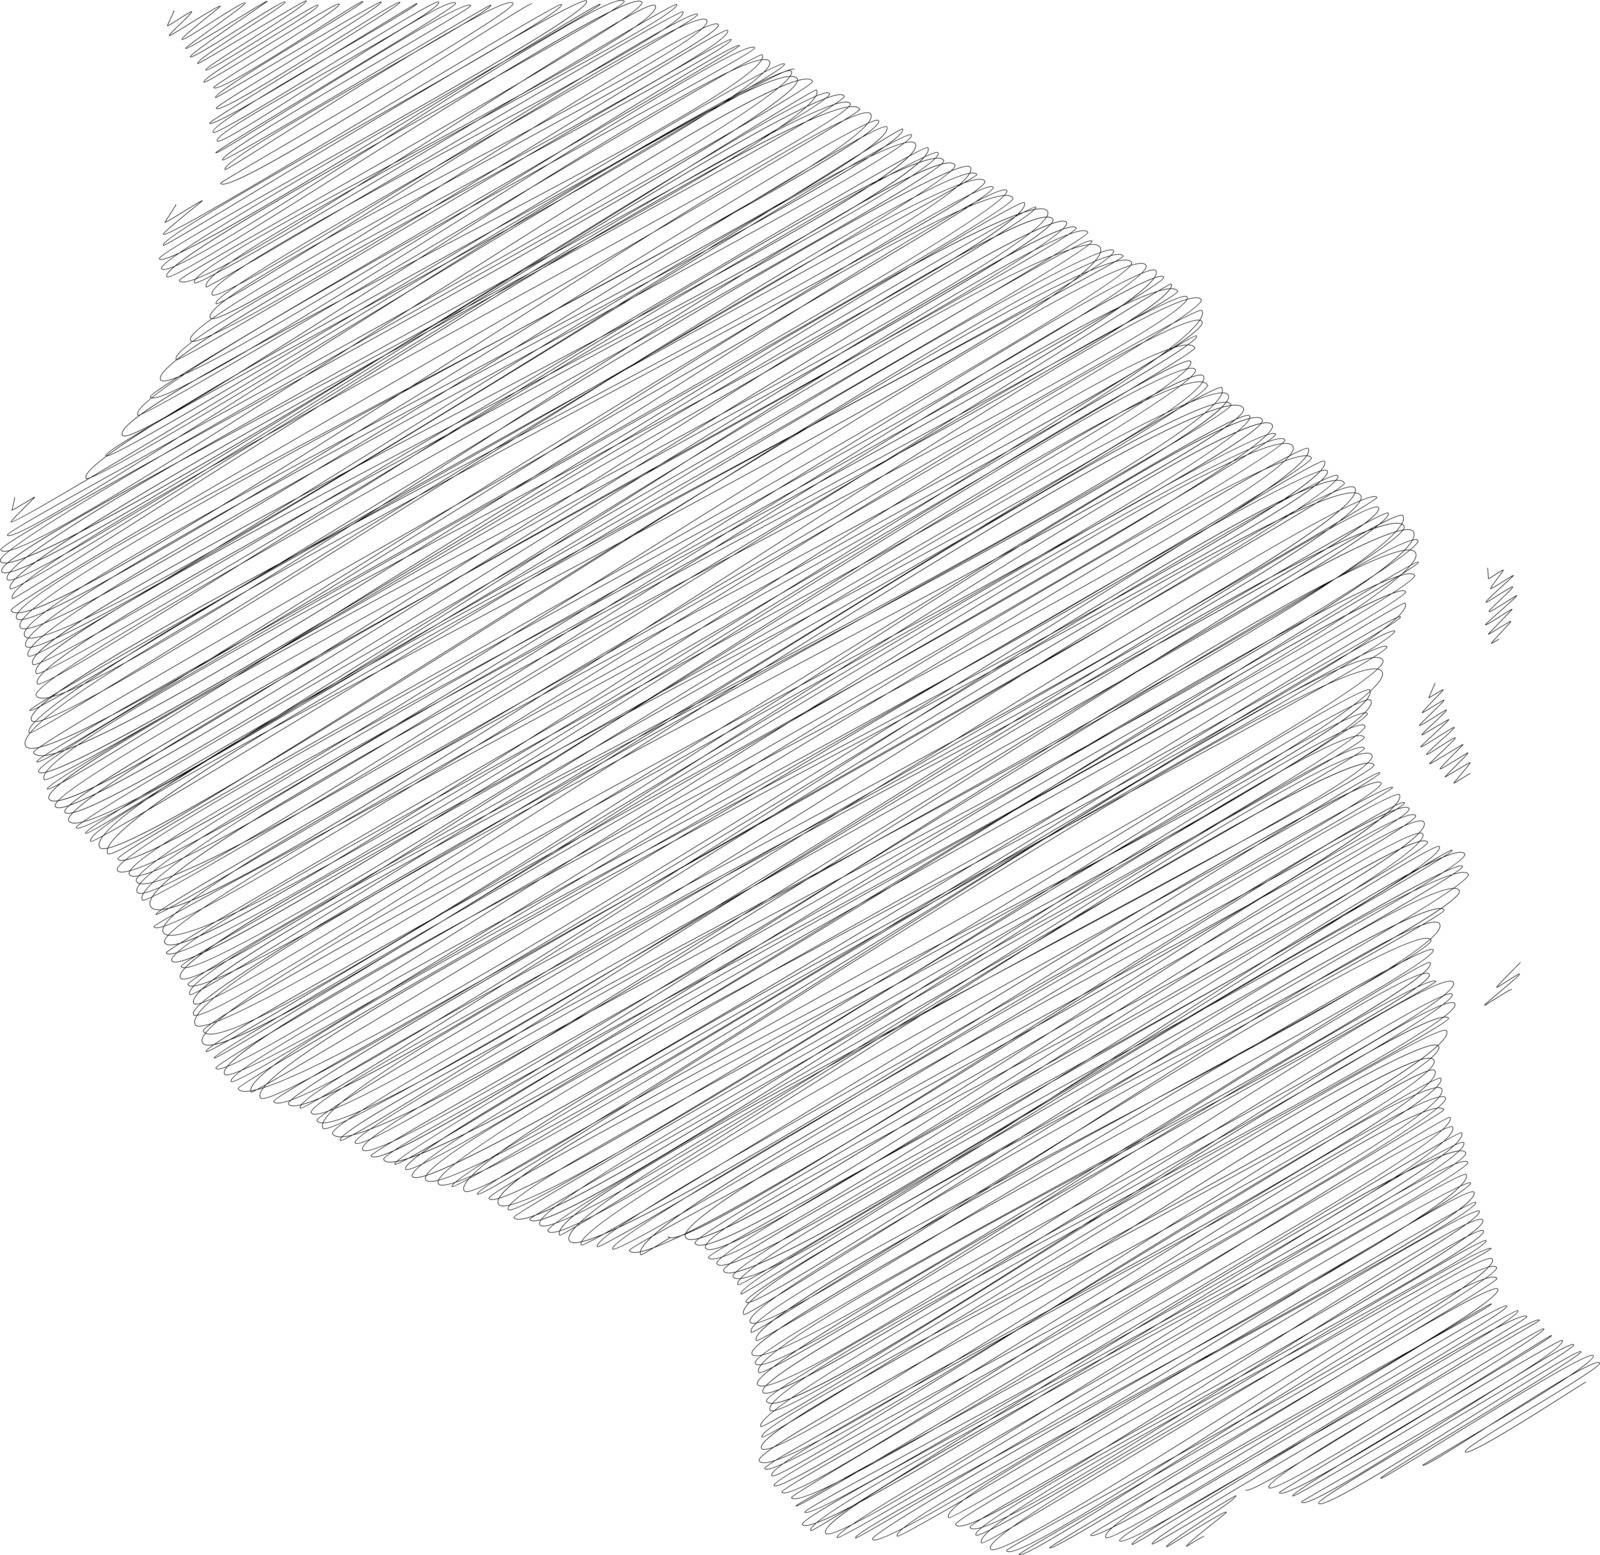 Tanzania - pencil scribble sketch silhouette map of country area with dropped shadow. Simple flat vector illustration.